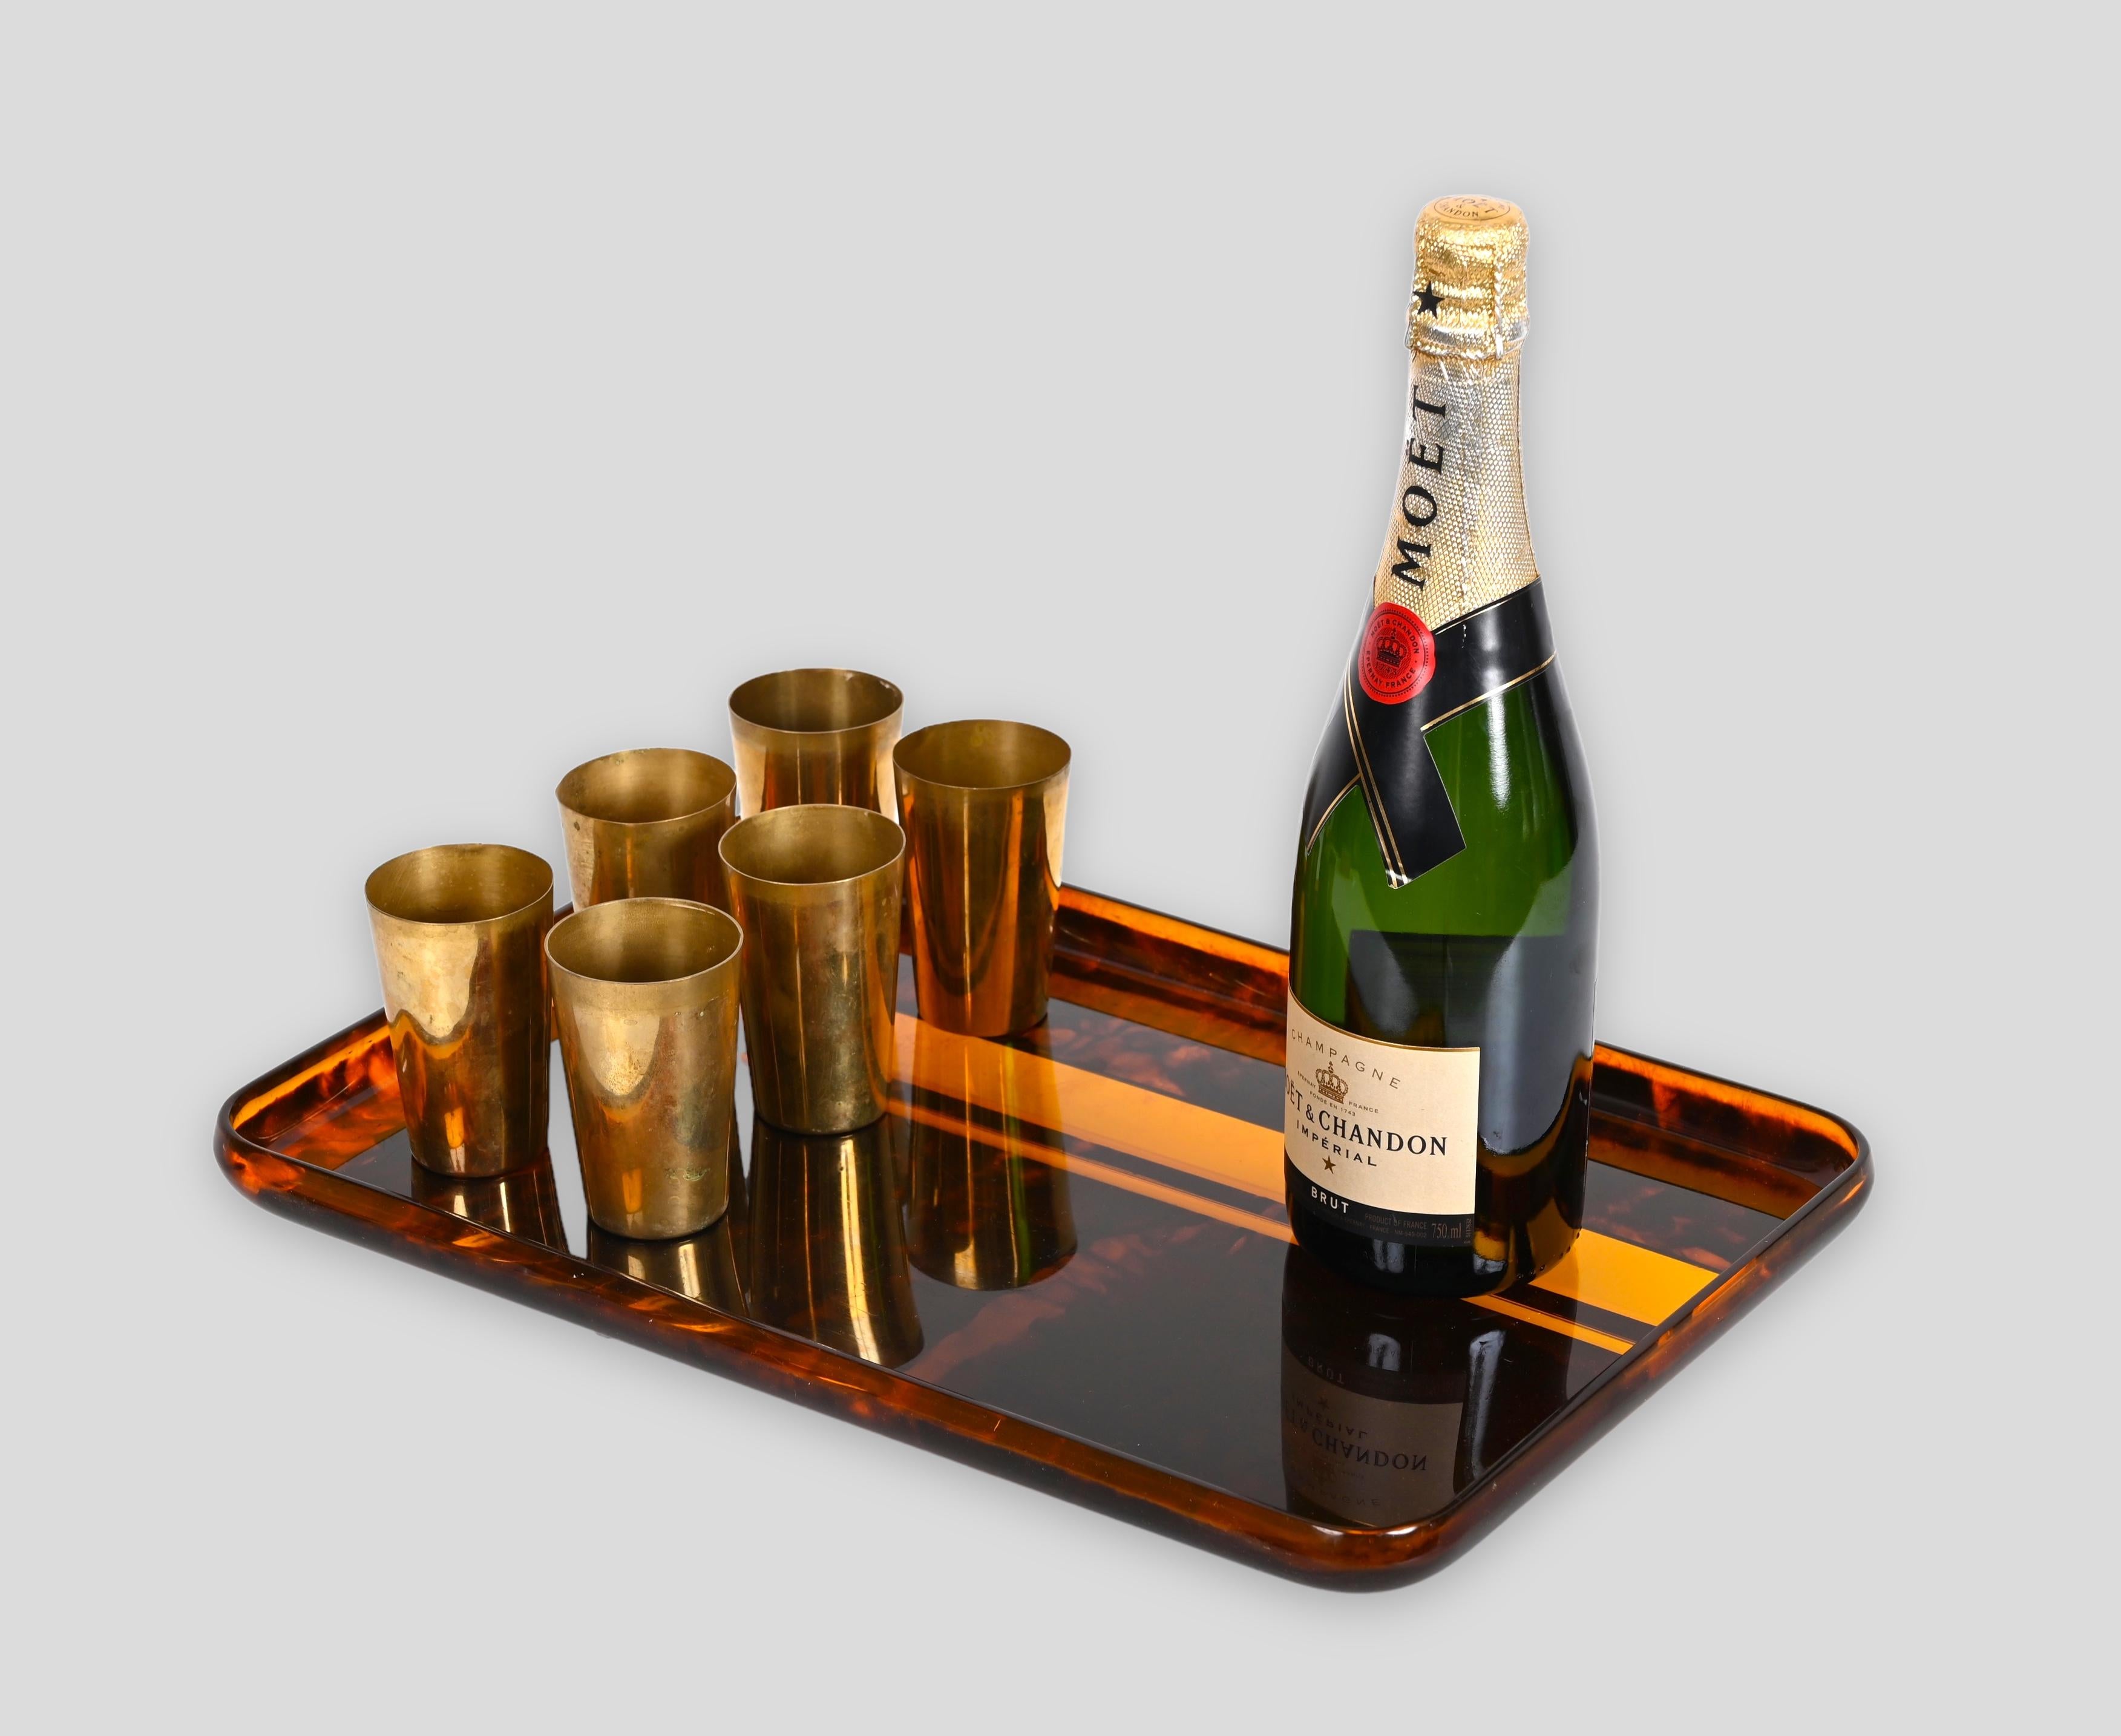 Wonderful mid-century tray in lucite with tortoiseshell effect. The tray has two lines in amber color that give a beautiful contrast to the tray.
Made in Italy in the 1970s. Attributable to a Christian Dior production with design attributed to Willy